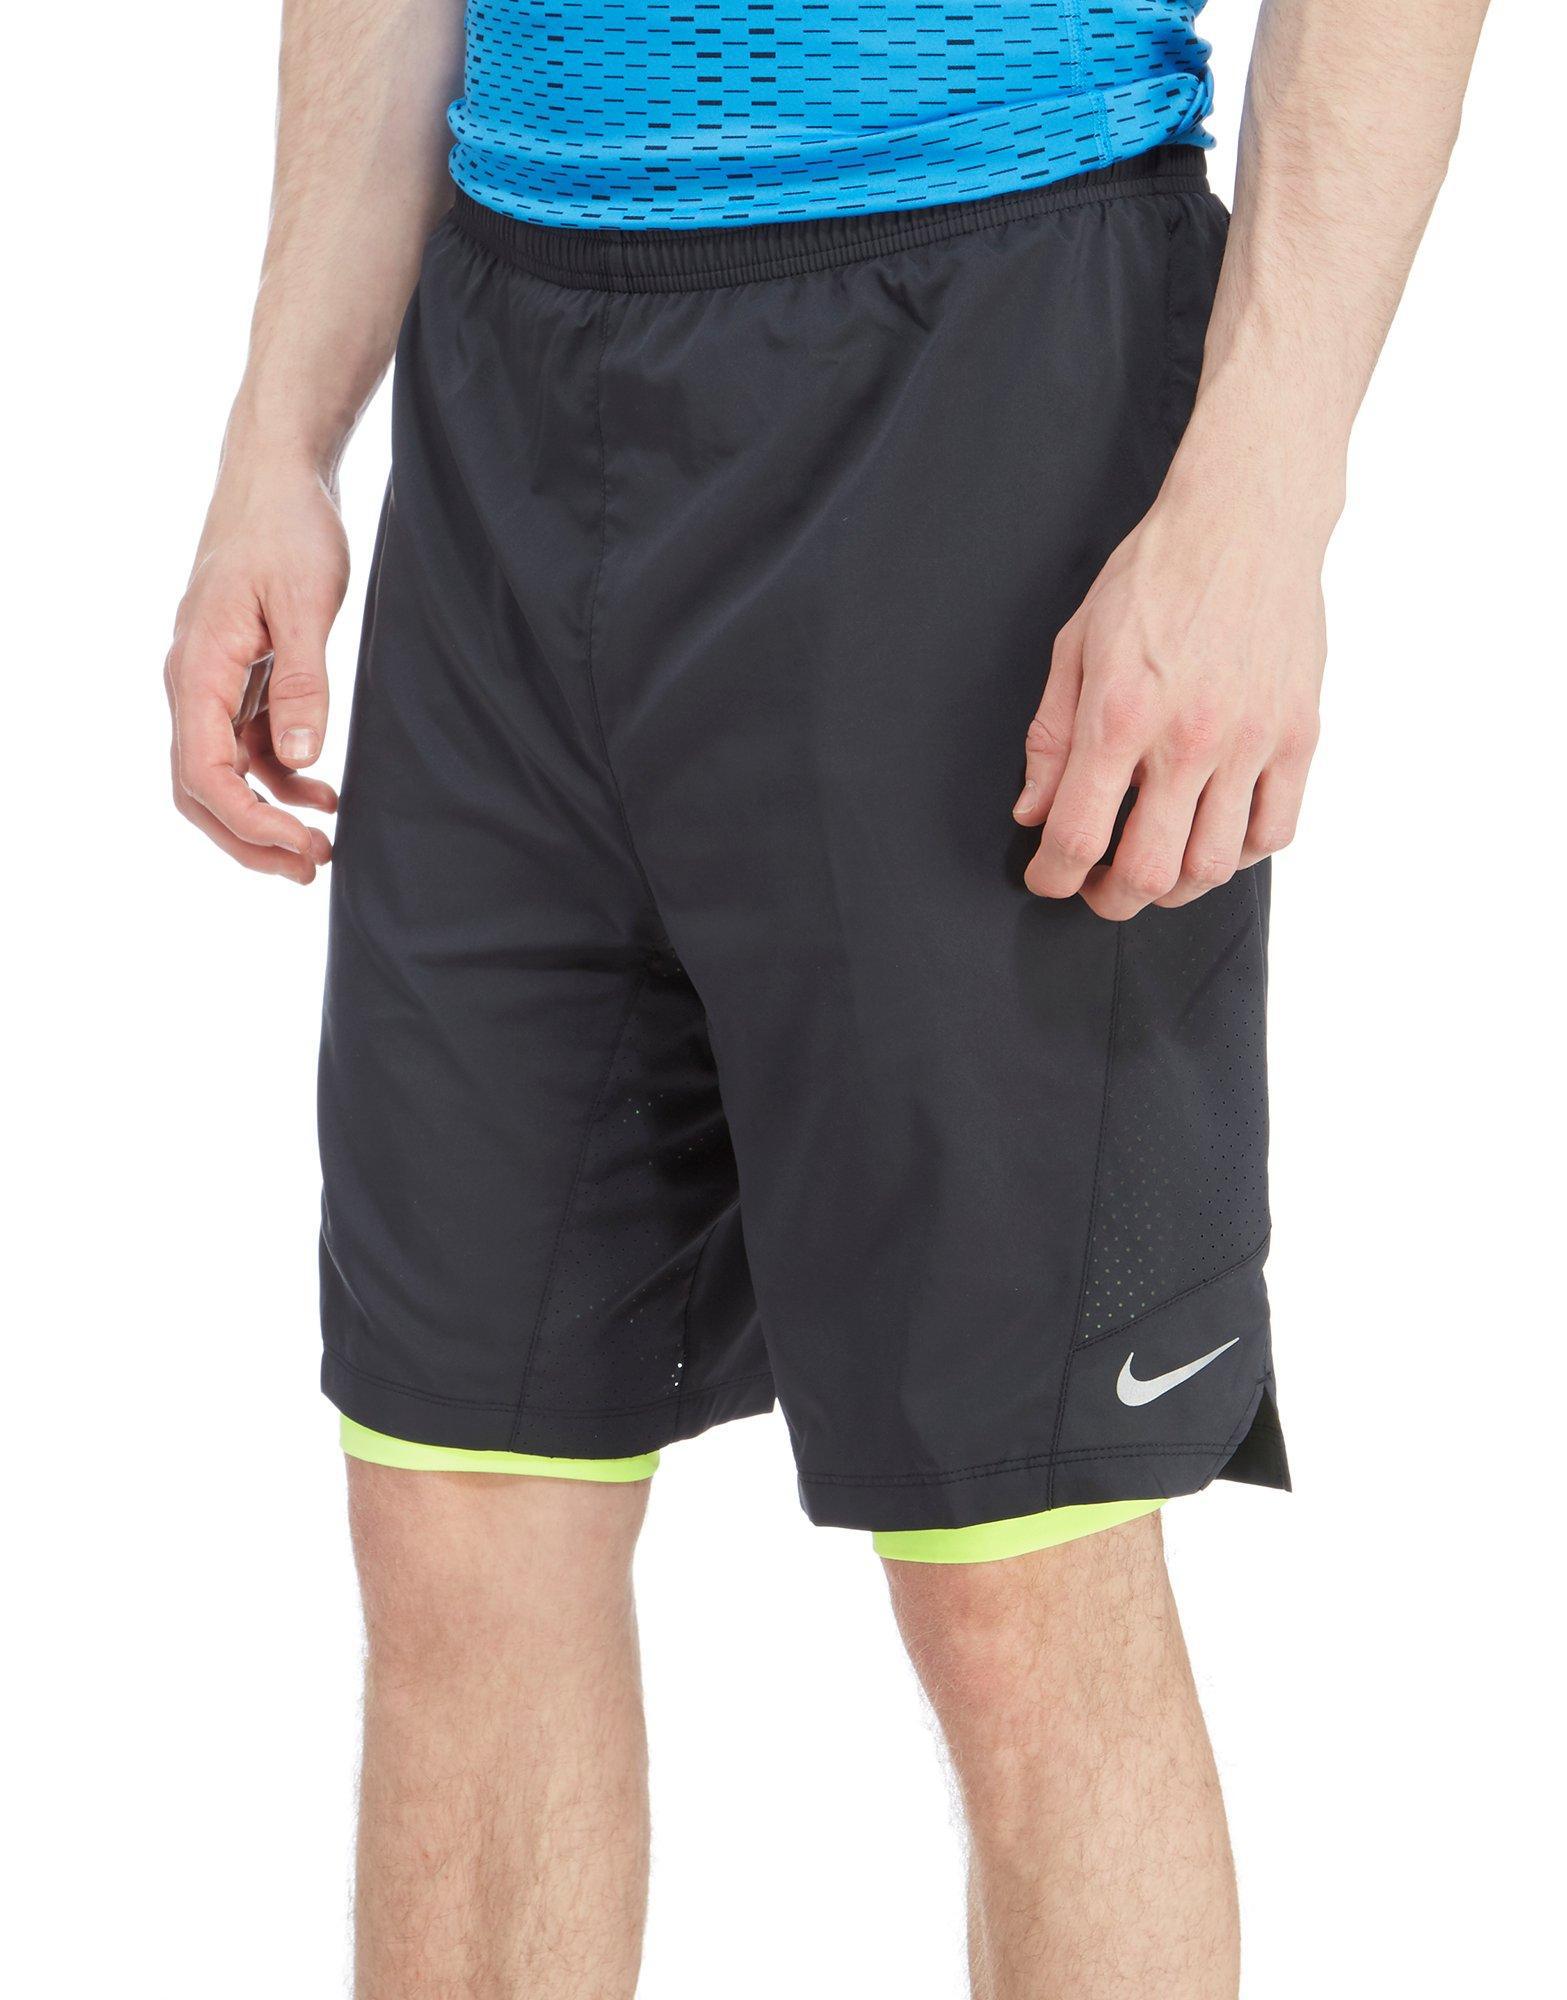 Nike Pursuit 9 Inch 2 In 1 Shorts in 